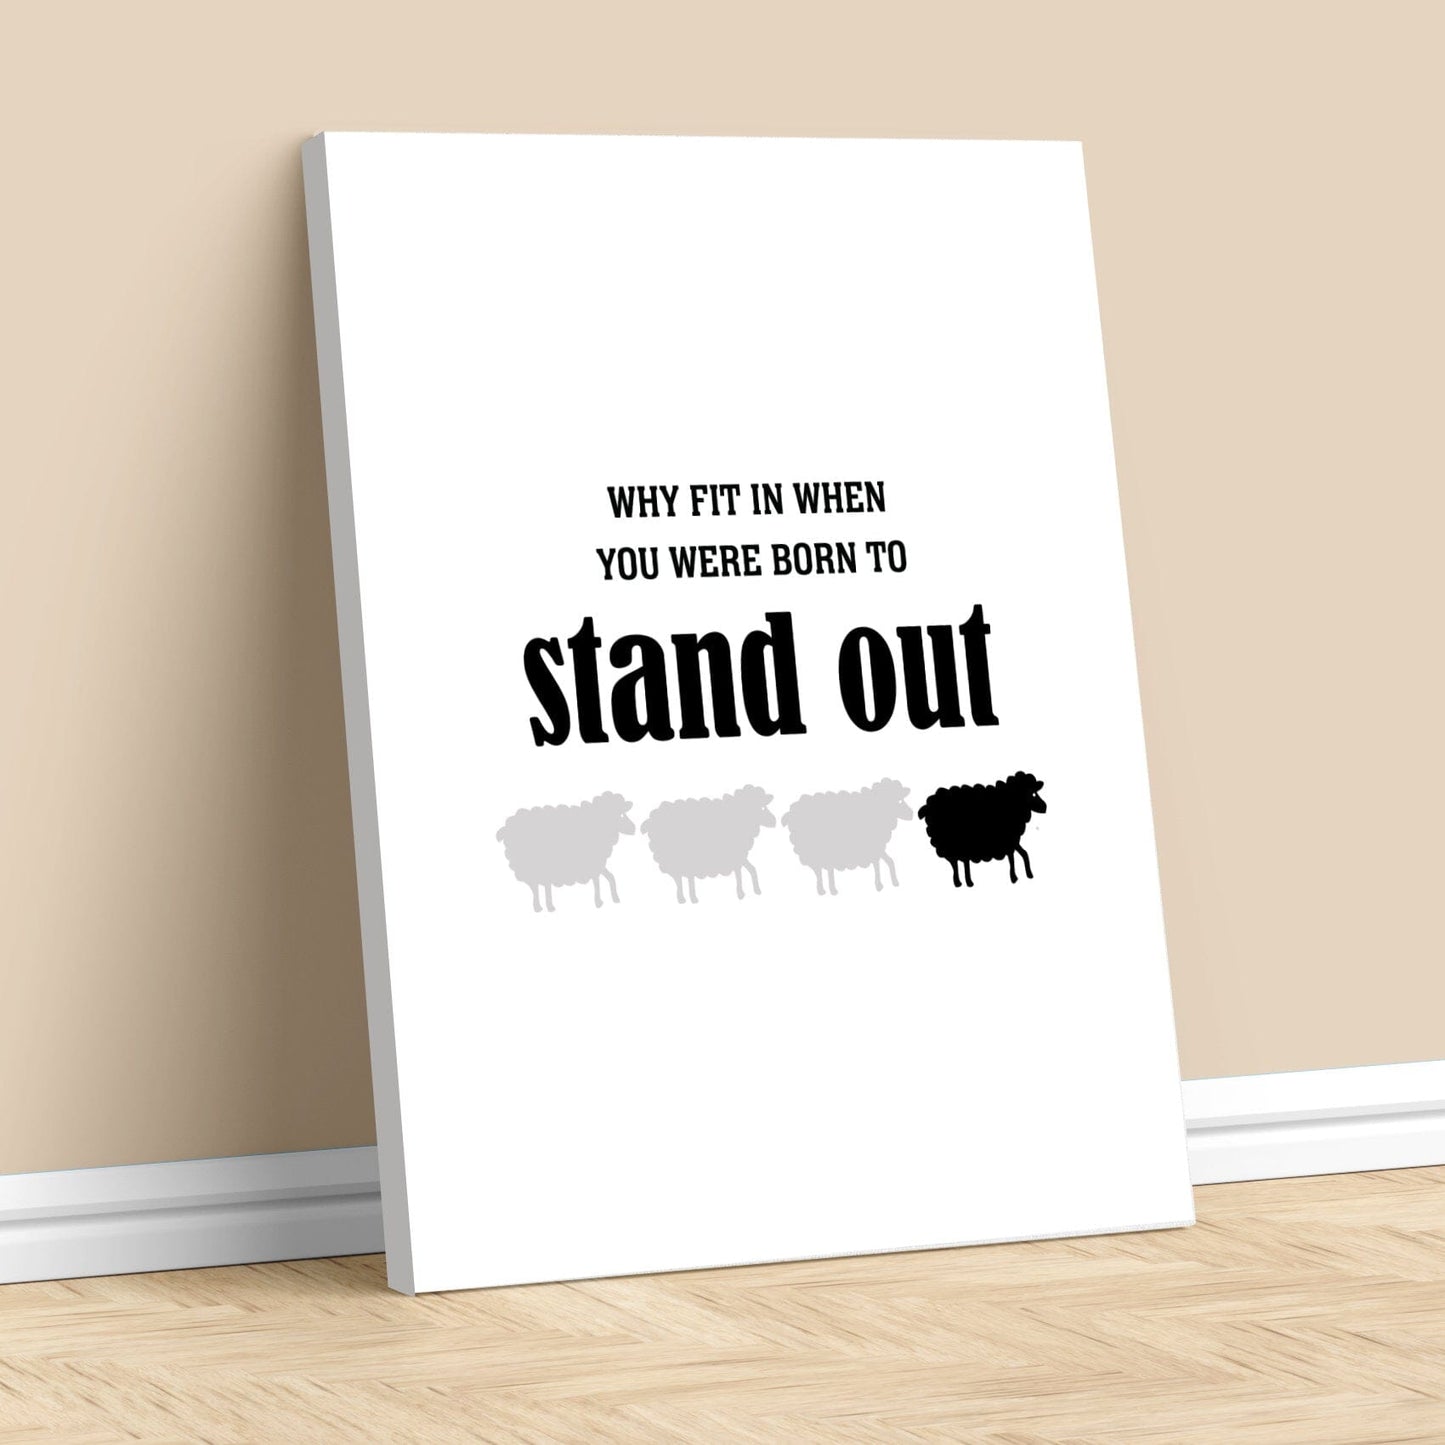 Why Fit in When You Were Born to Stand Out - Wise and Witty Print Wise and Wiseass Quotes Song Lyrics Art 11x14 Canvas Wrap 